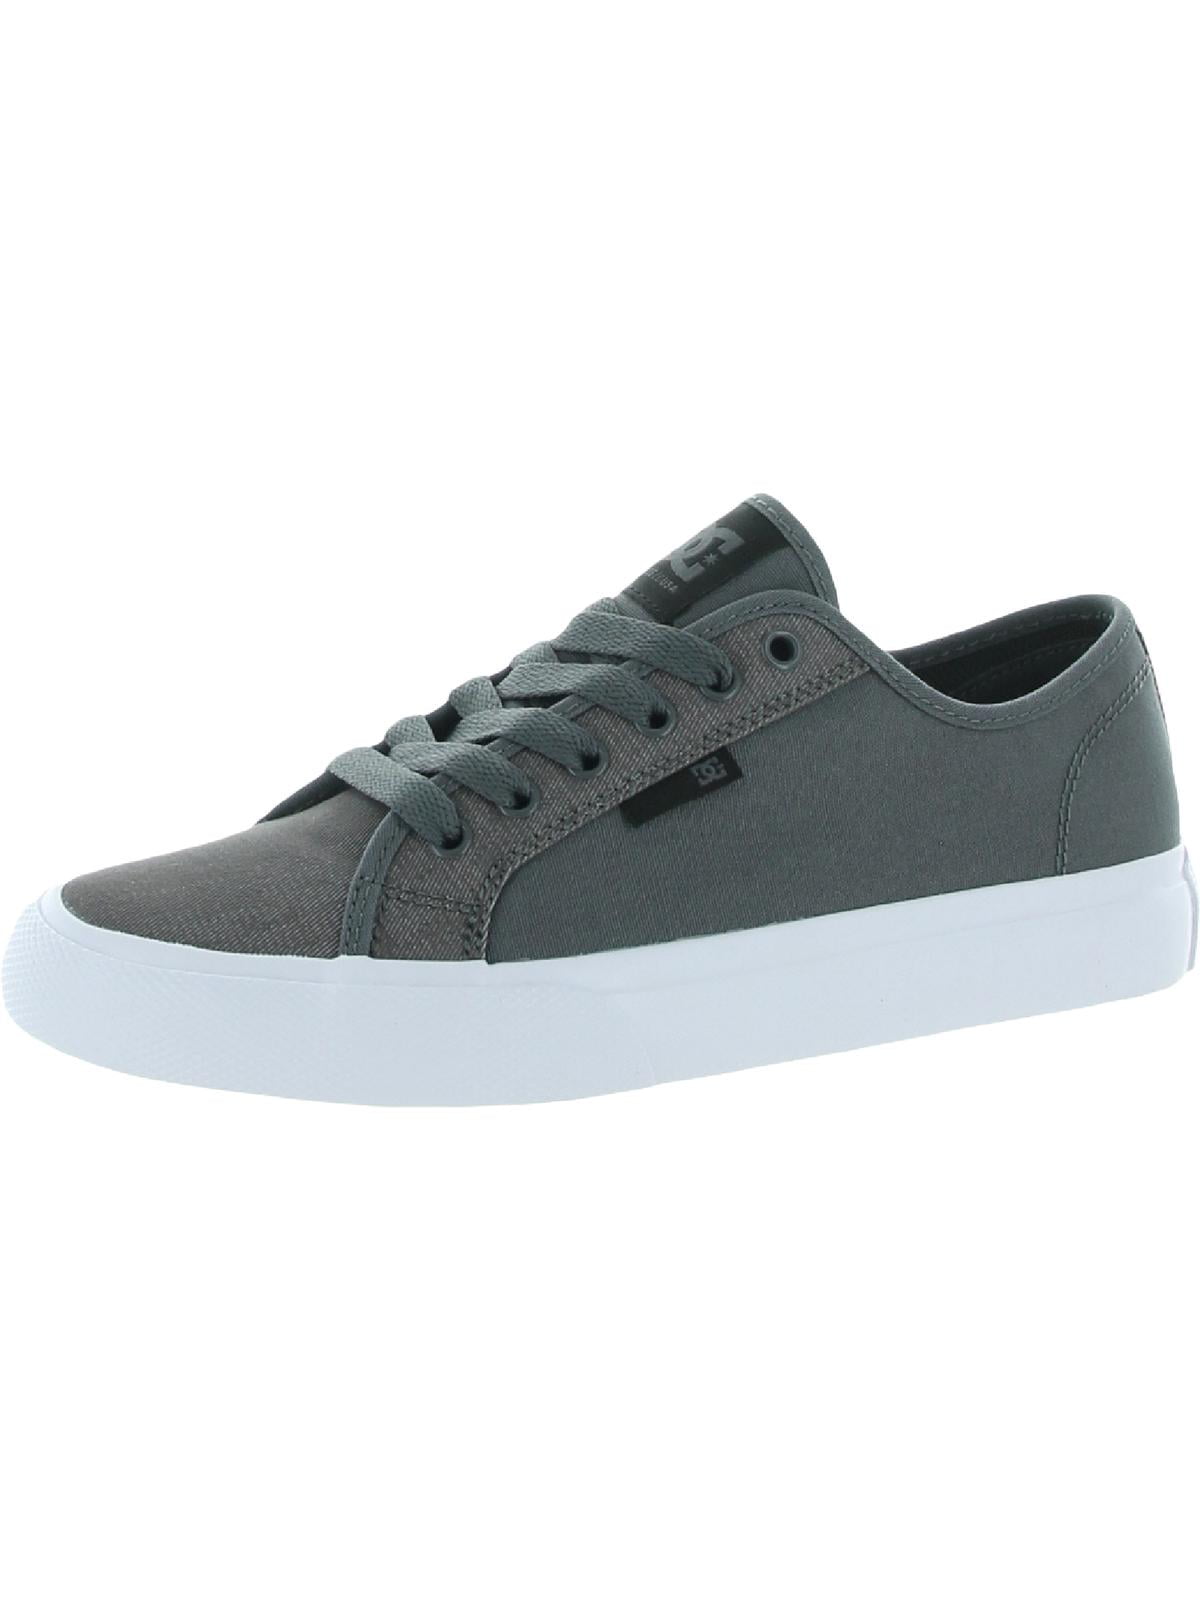 DC Shoes Trase TX Grey Grey White Canvas Lace Up Casual Shoes 